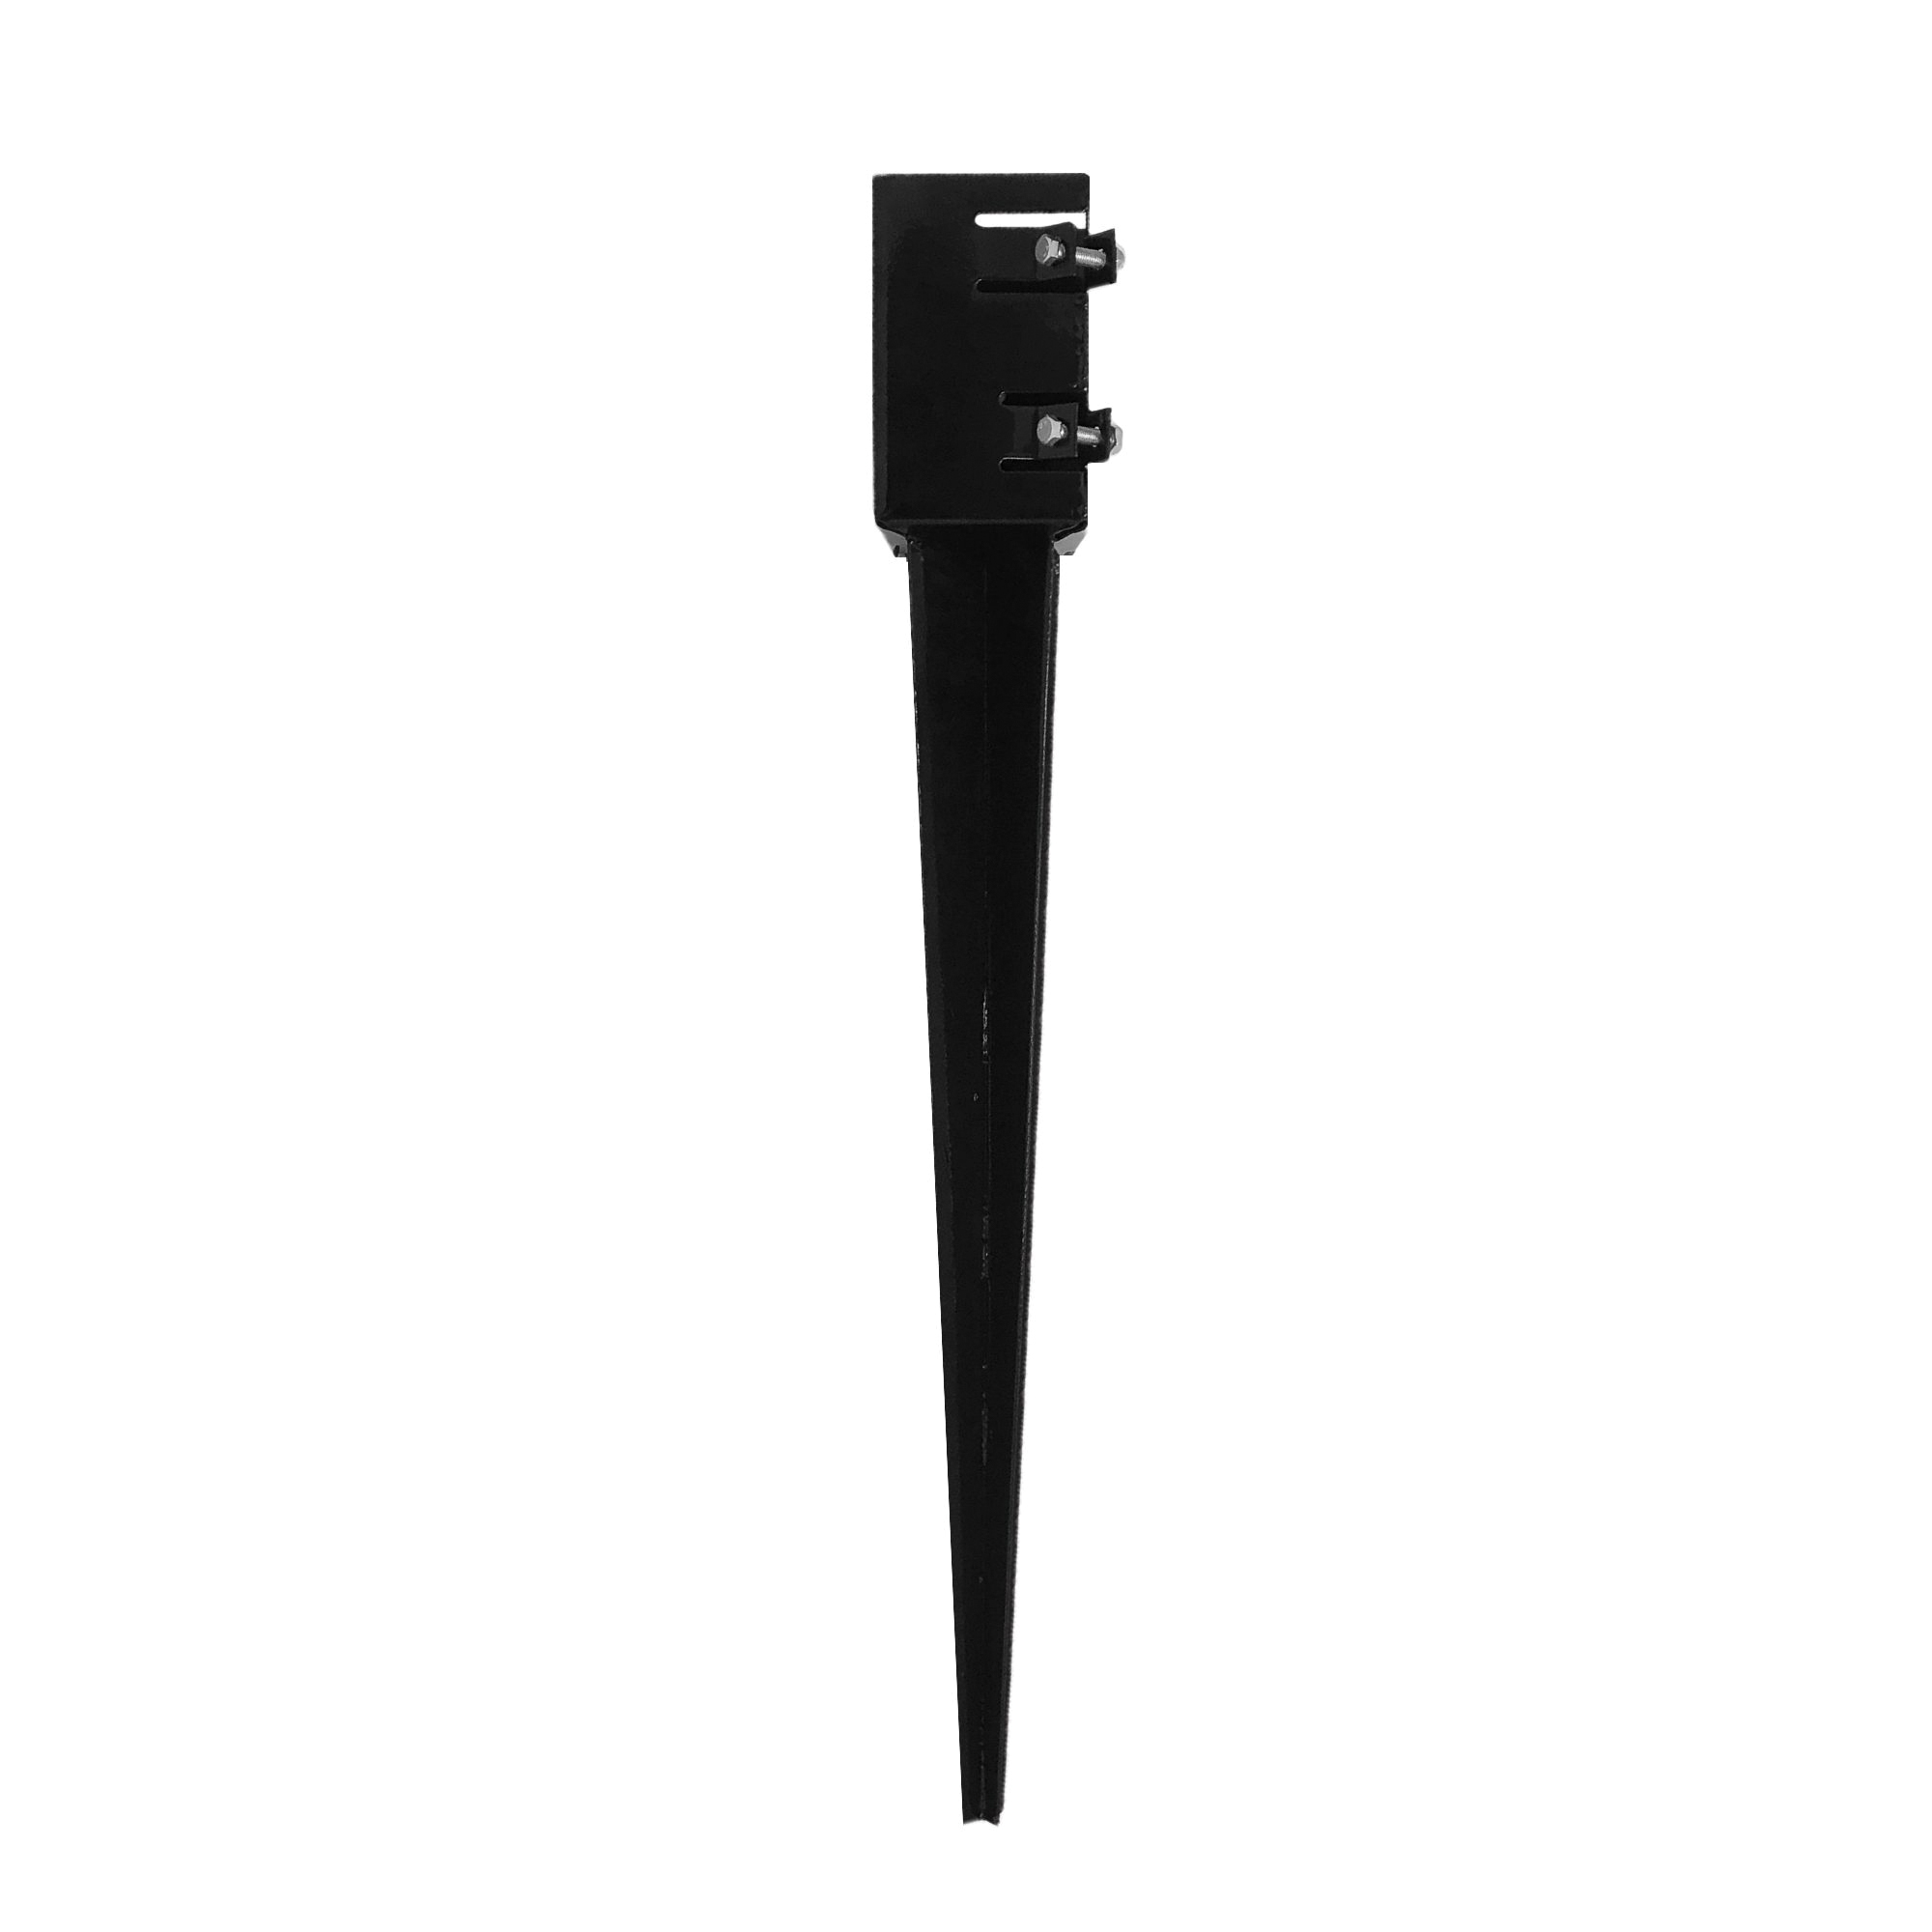 NYS30B Yard and Lawn Spike with In-Ground Post Support, 4 x 4 in Post/Joist, Steel, Powder-Coated Glossy